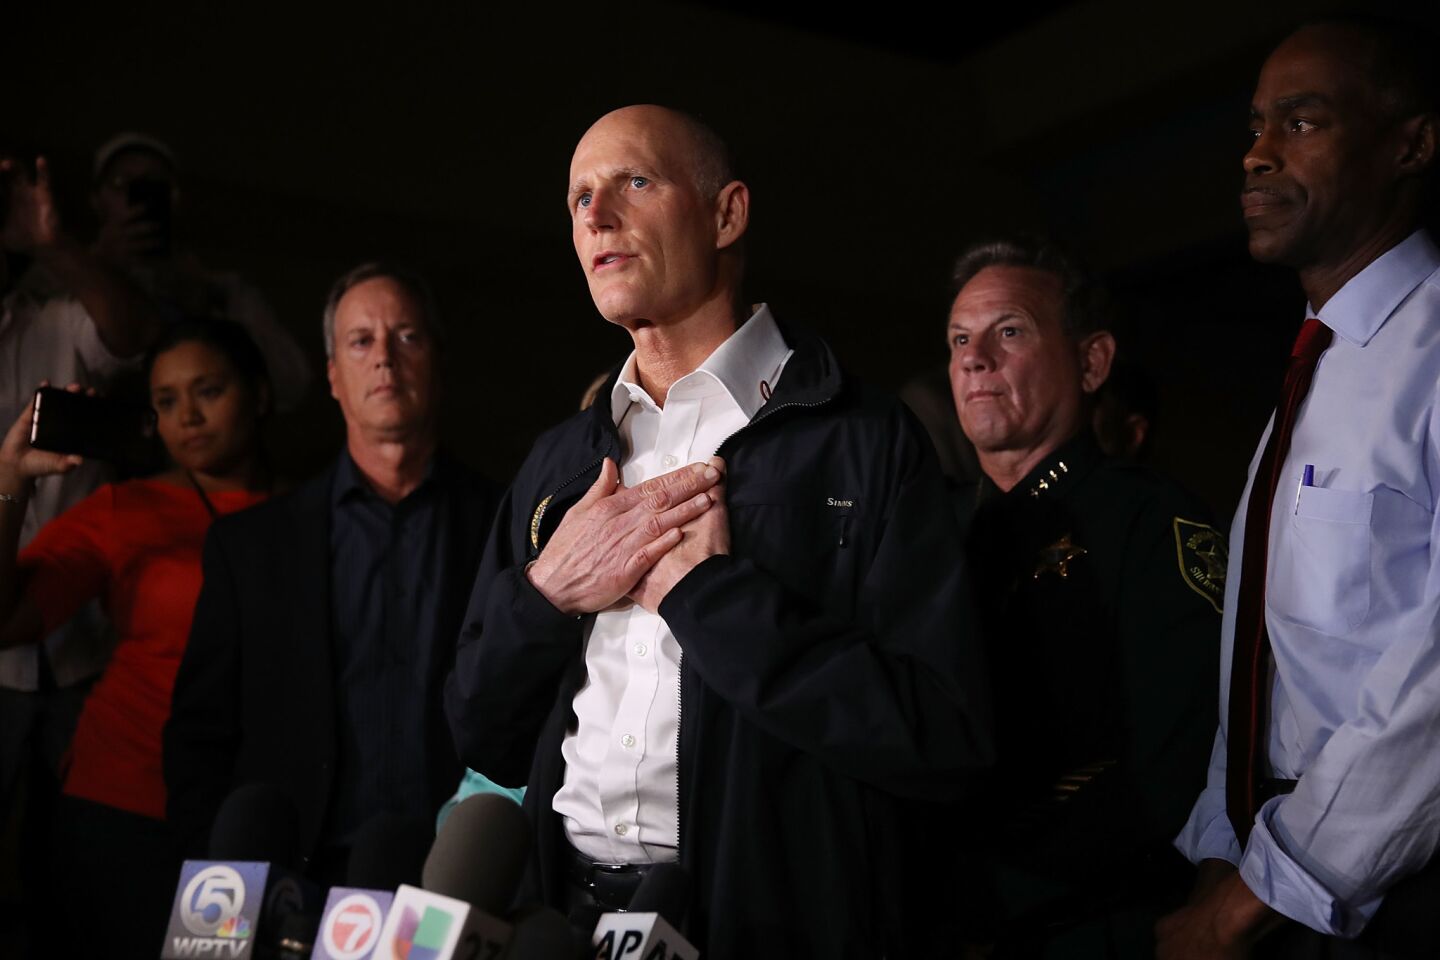 Florida Gov. Rick Scott speaks to the media as he visits Marjory Stoneman Douglas High School in Parkland, Fla., after a shooting there killed 17 people.